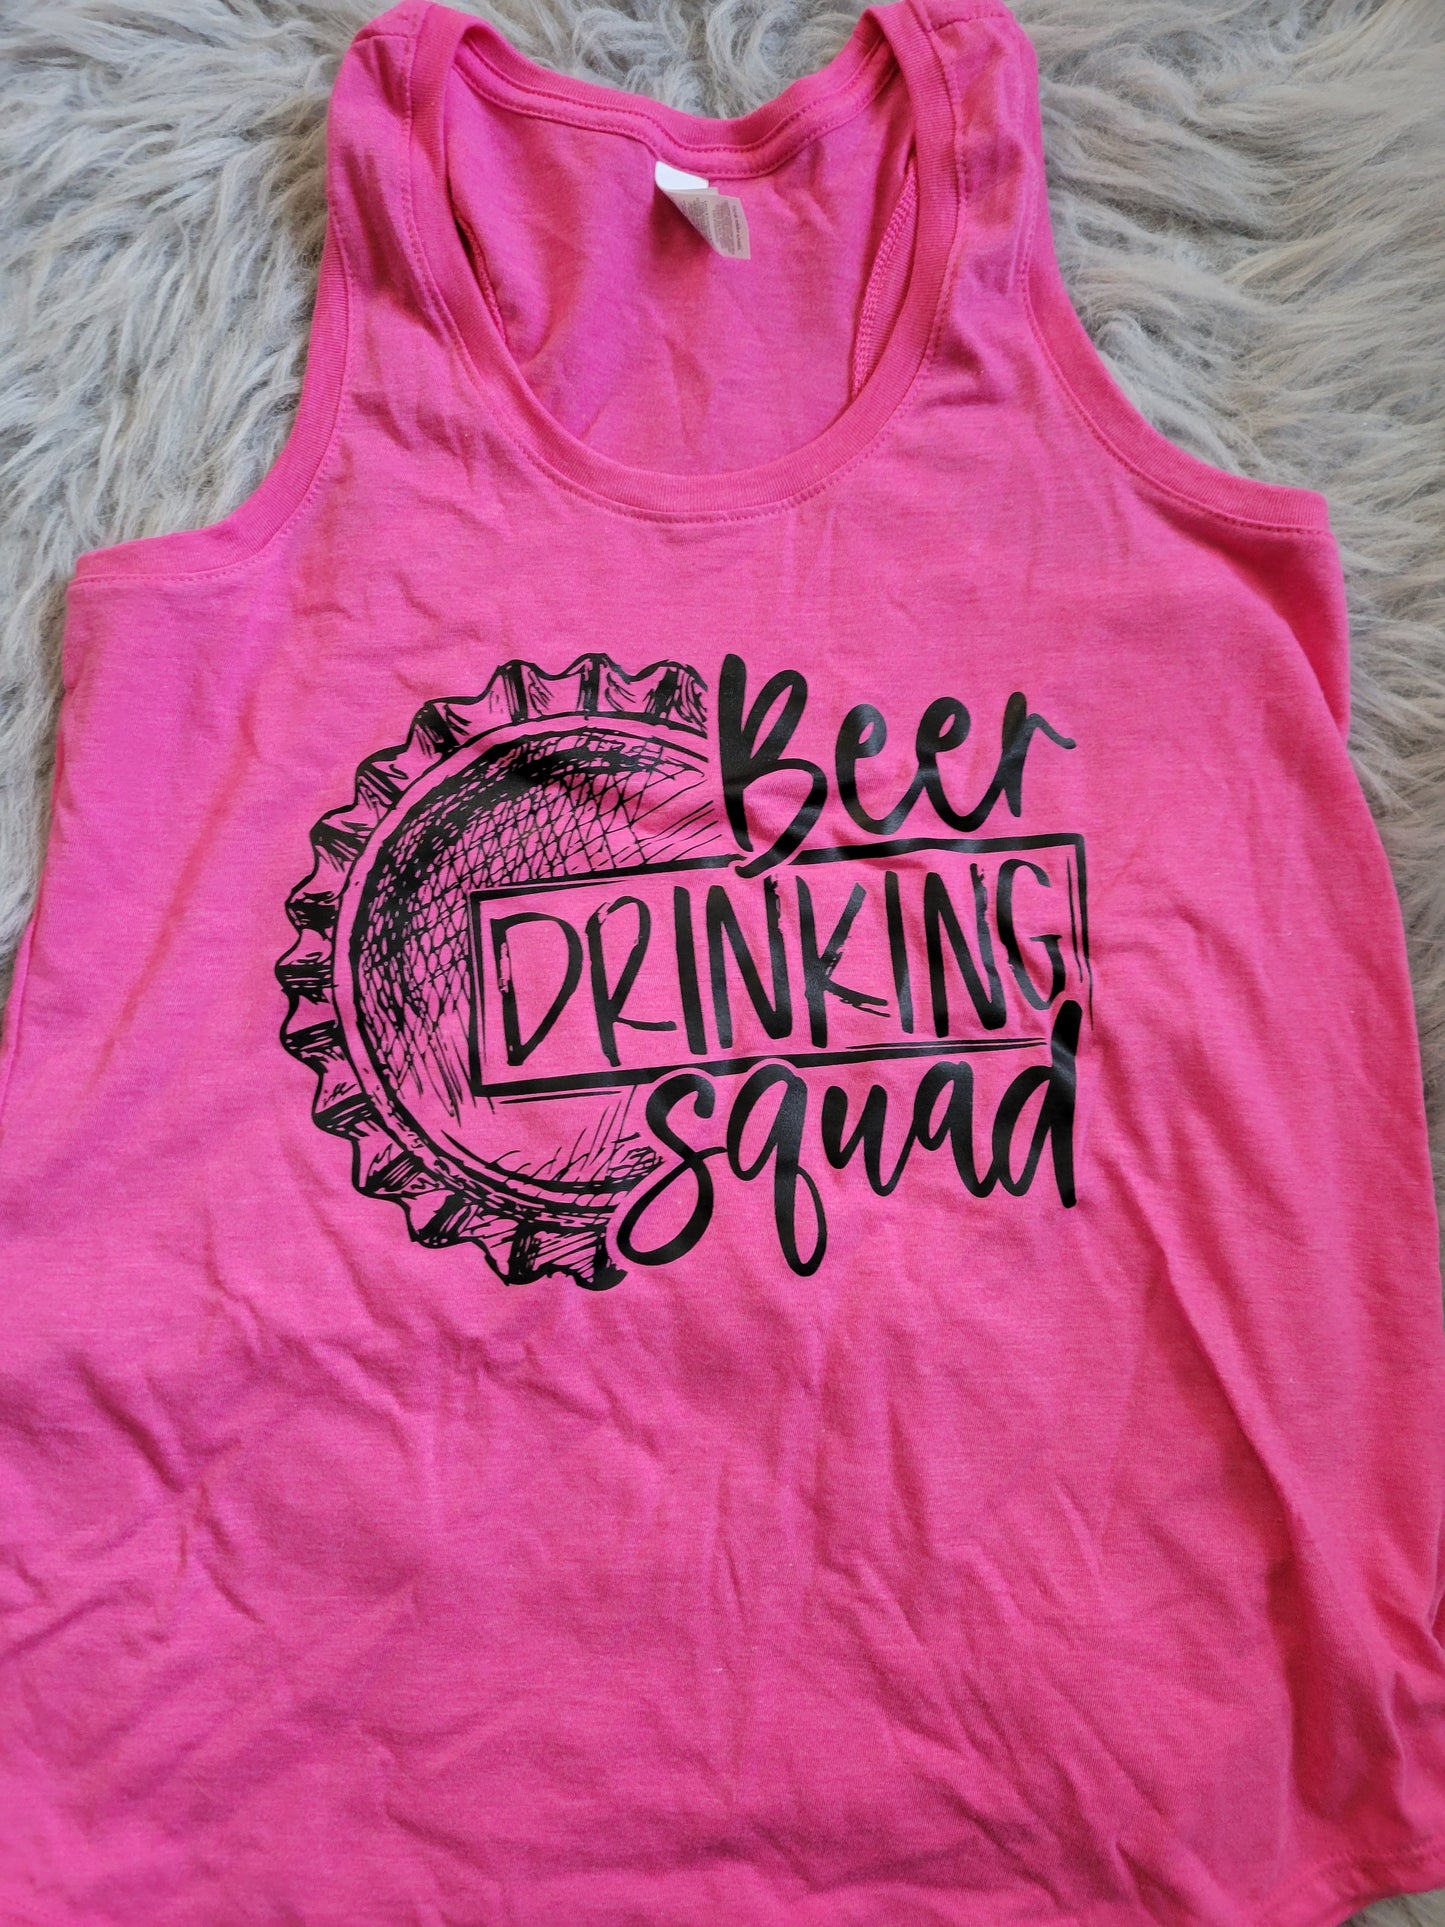 Beer drinking squad - LARGE